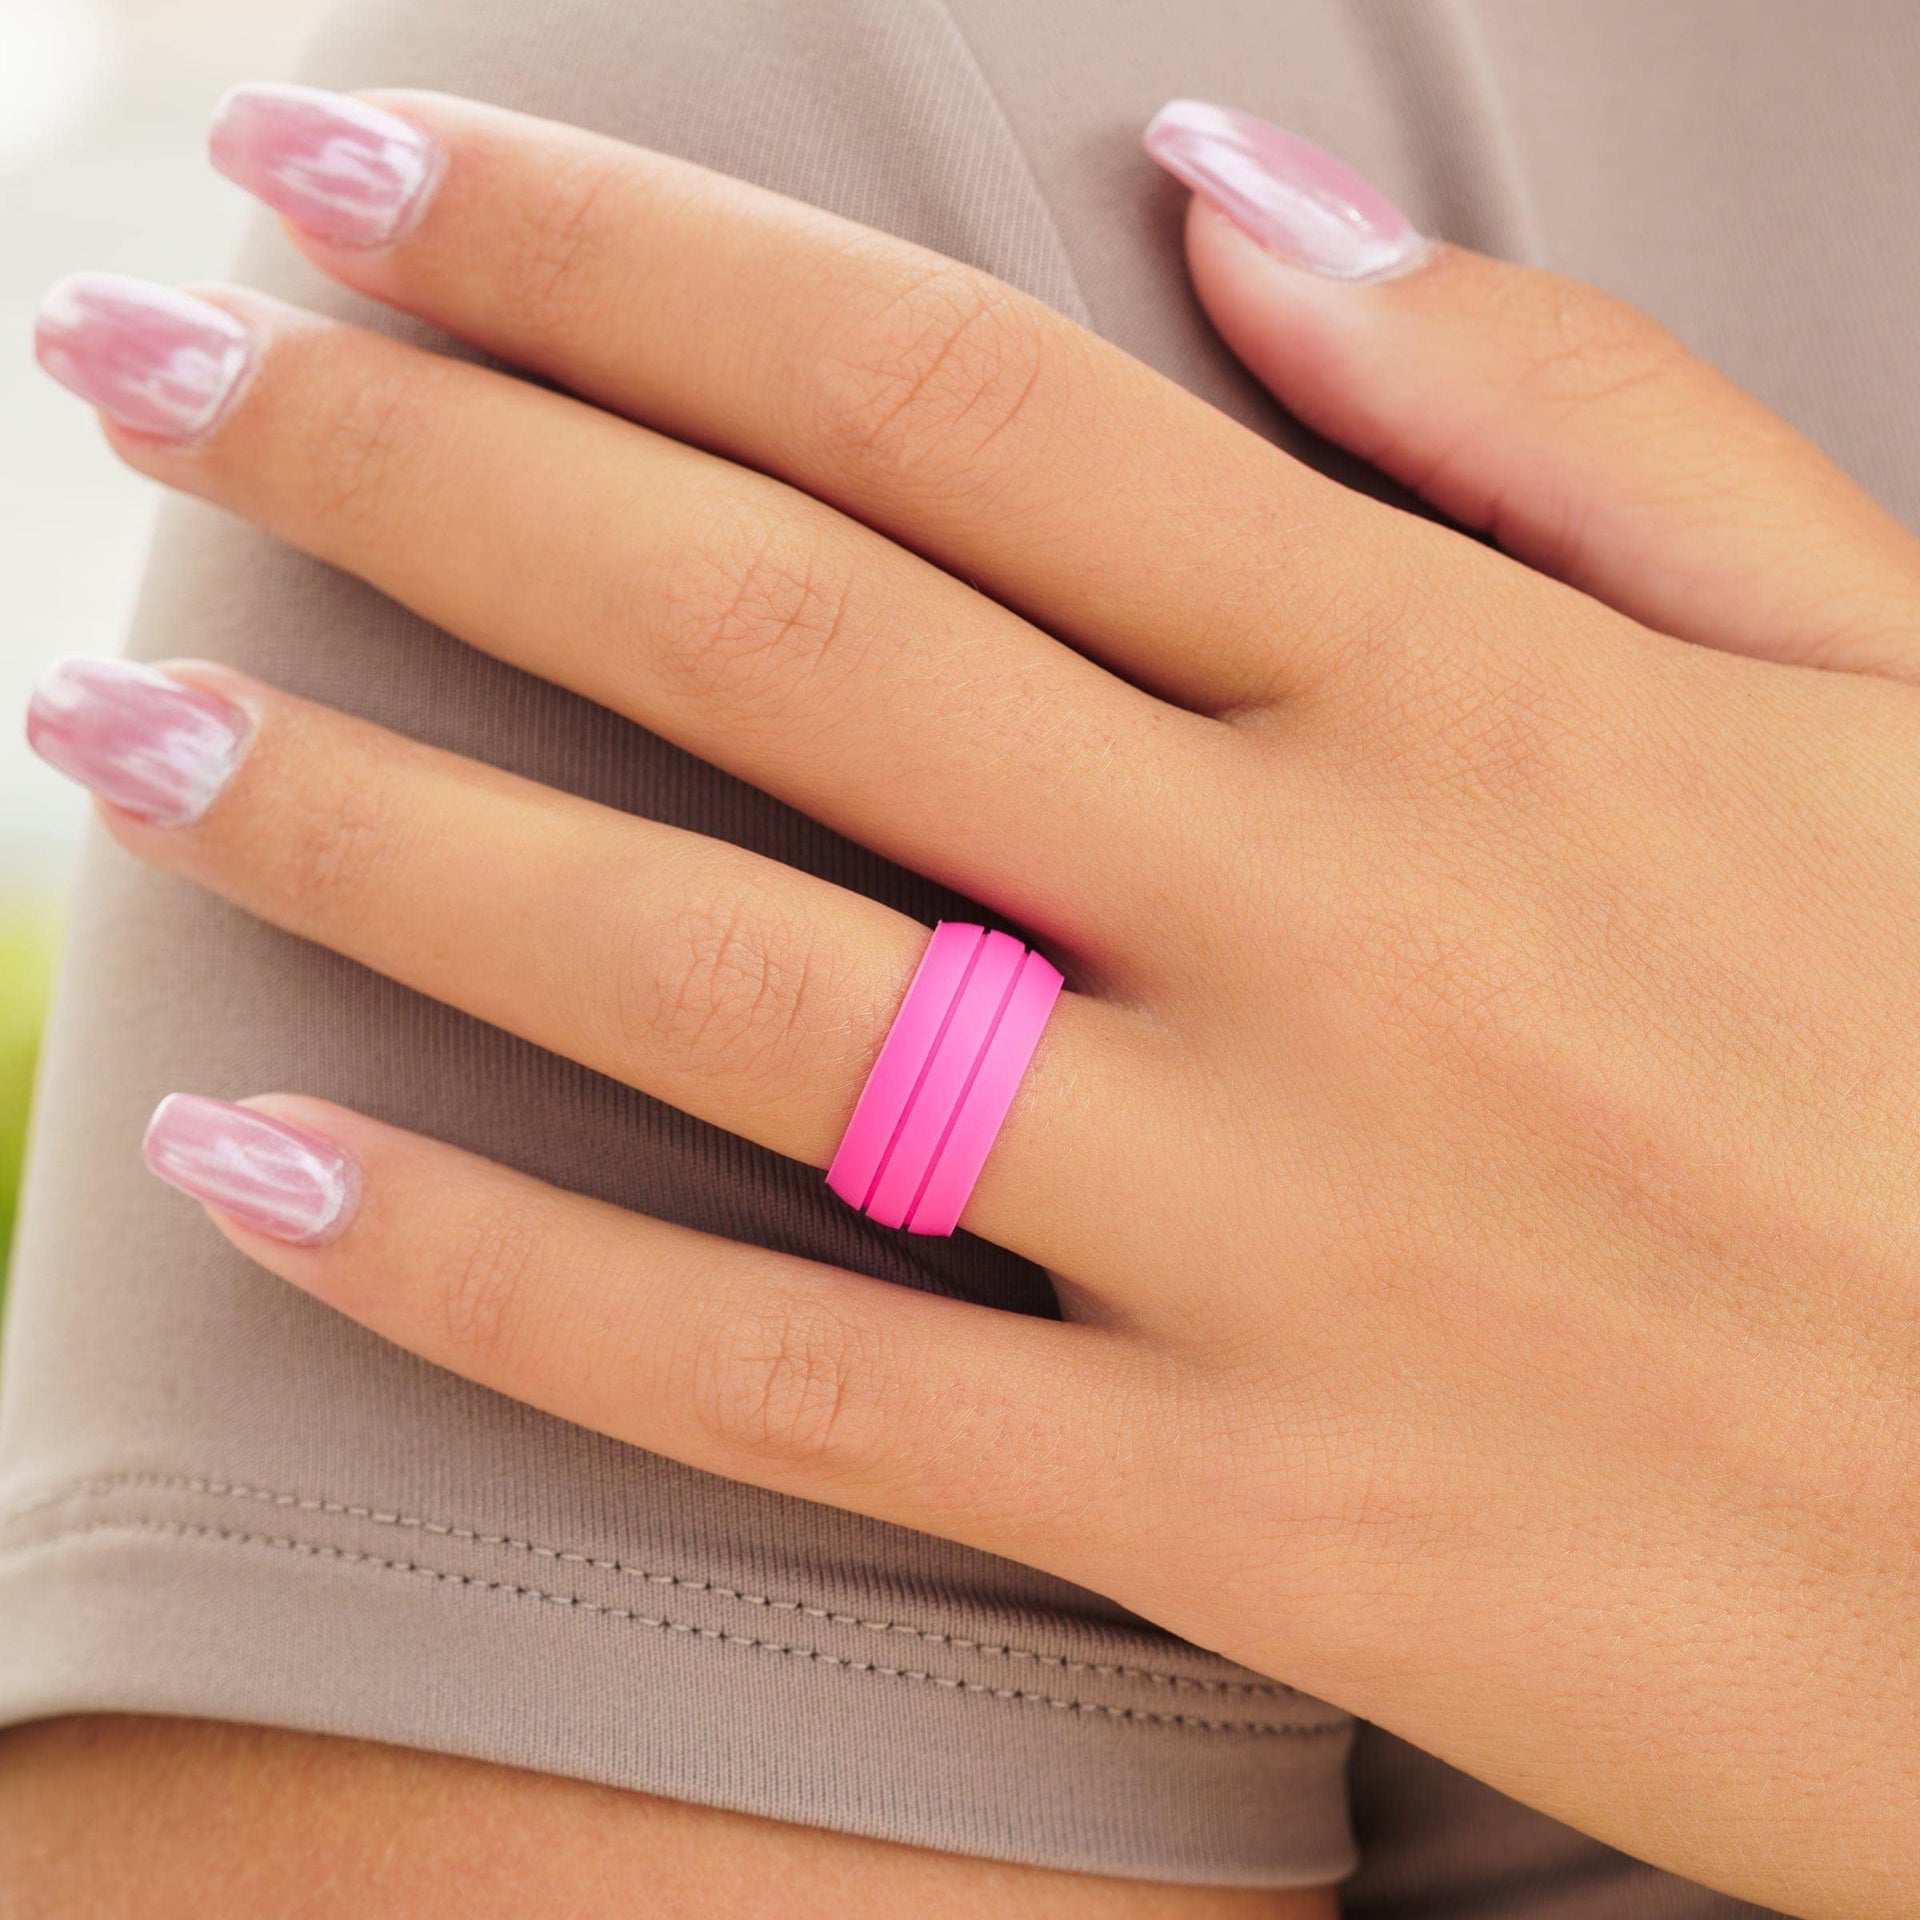 pink silicone wedding band on woman's hand